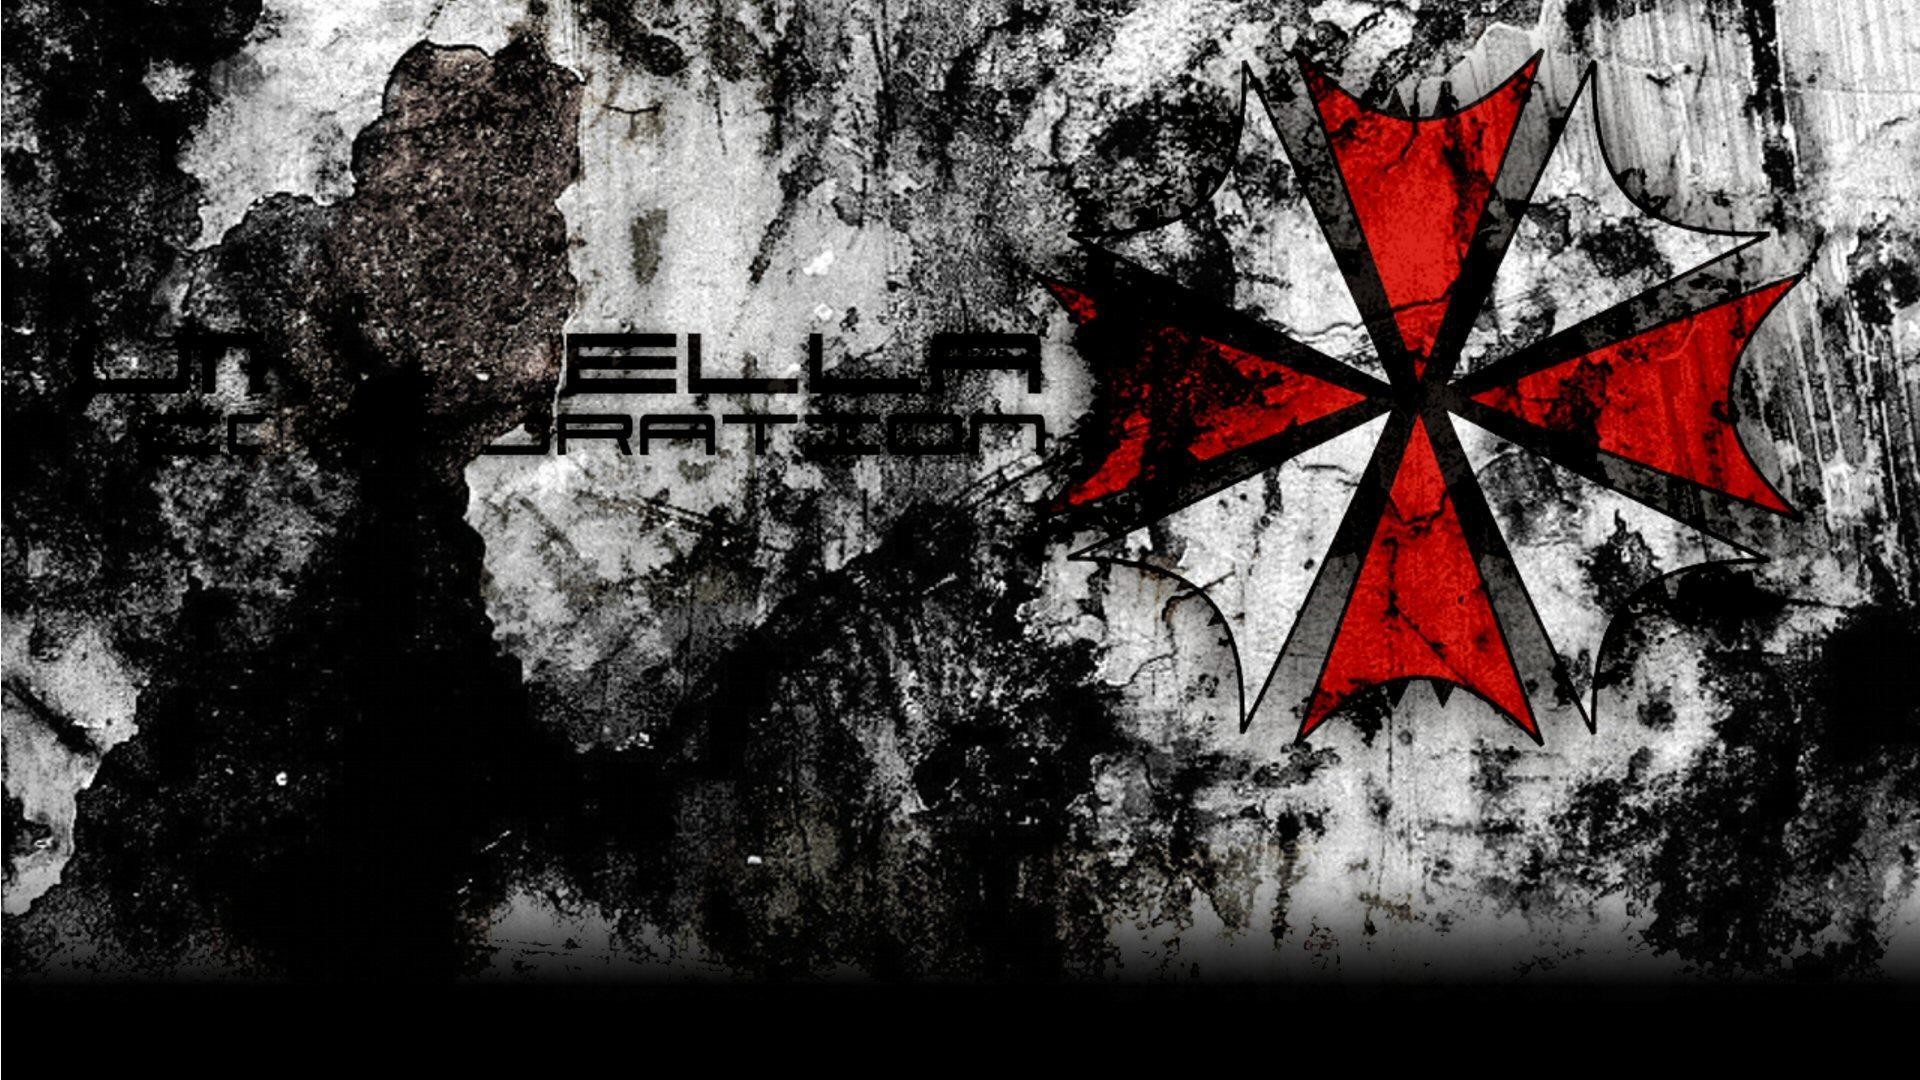 Related Wallpapers. Company Umbrella Corporation